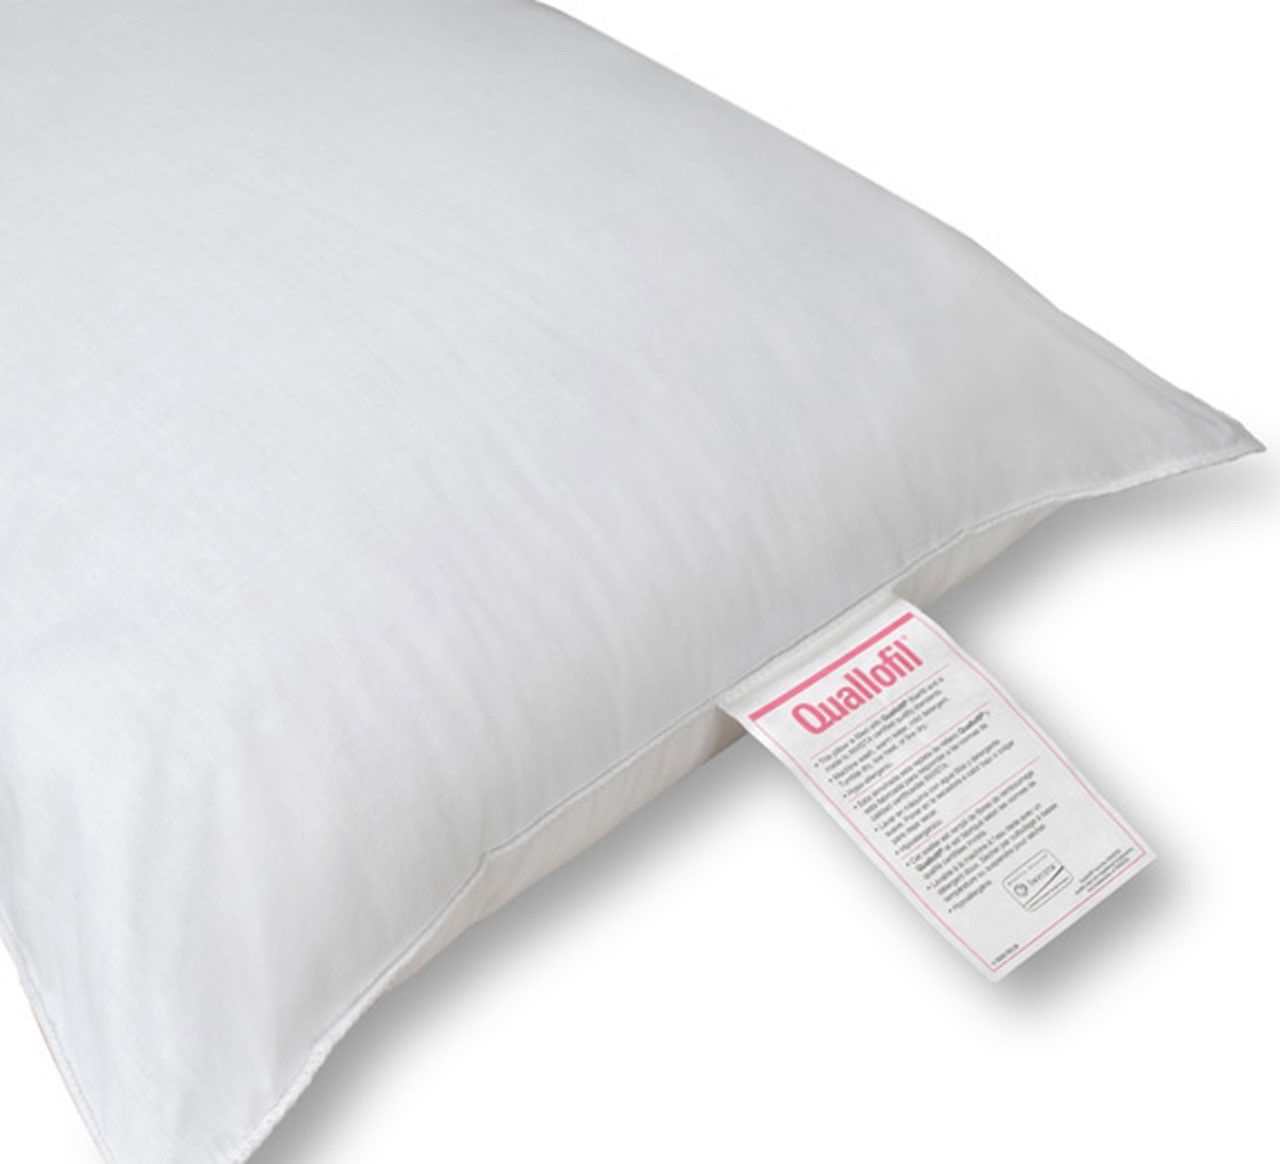 In what dimensions can one find the quallofil pillow named Qualofill II®?